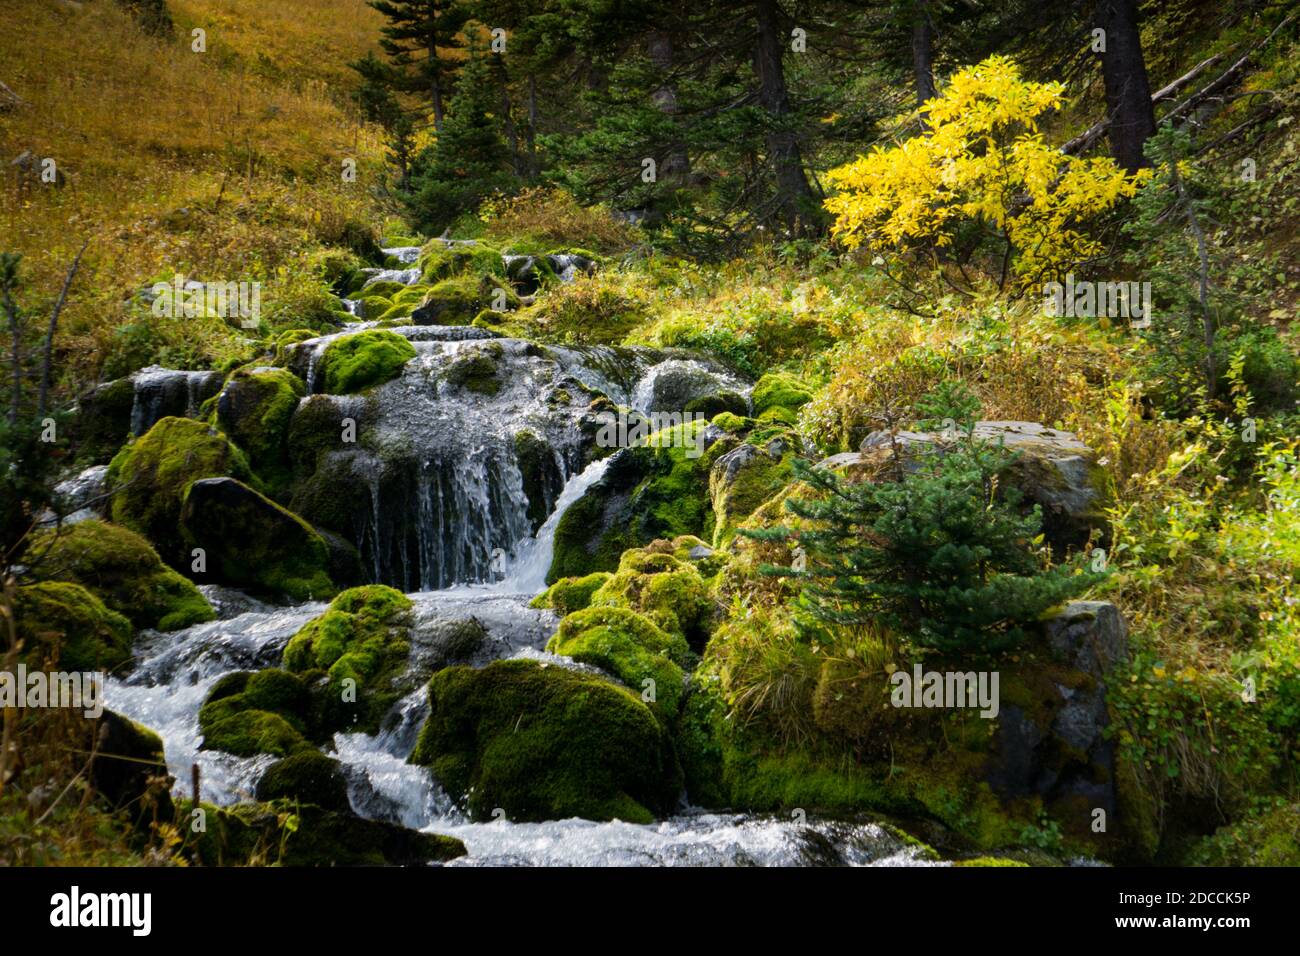 A mountain stream rushes over mossy rocks in a high altitude meadow, surrounded by fall colors Stock Photo